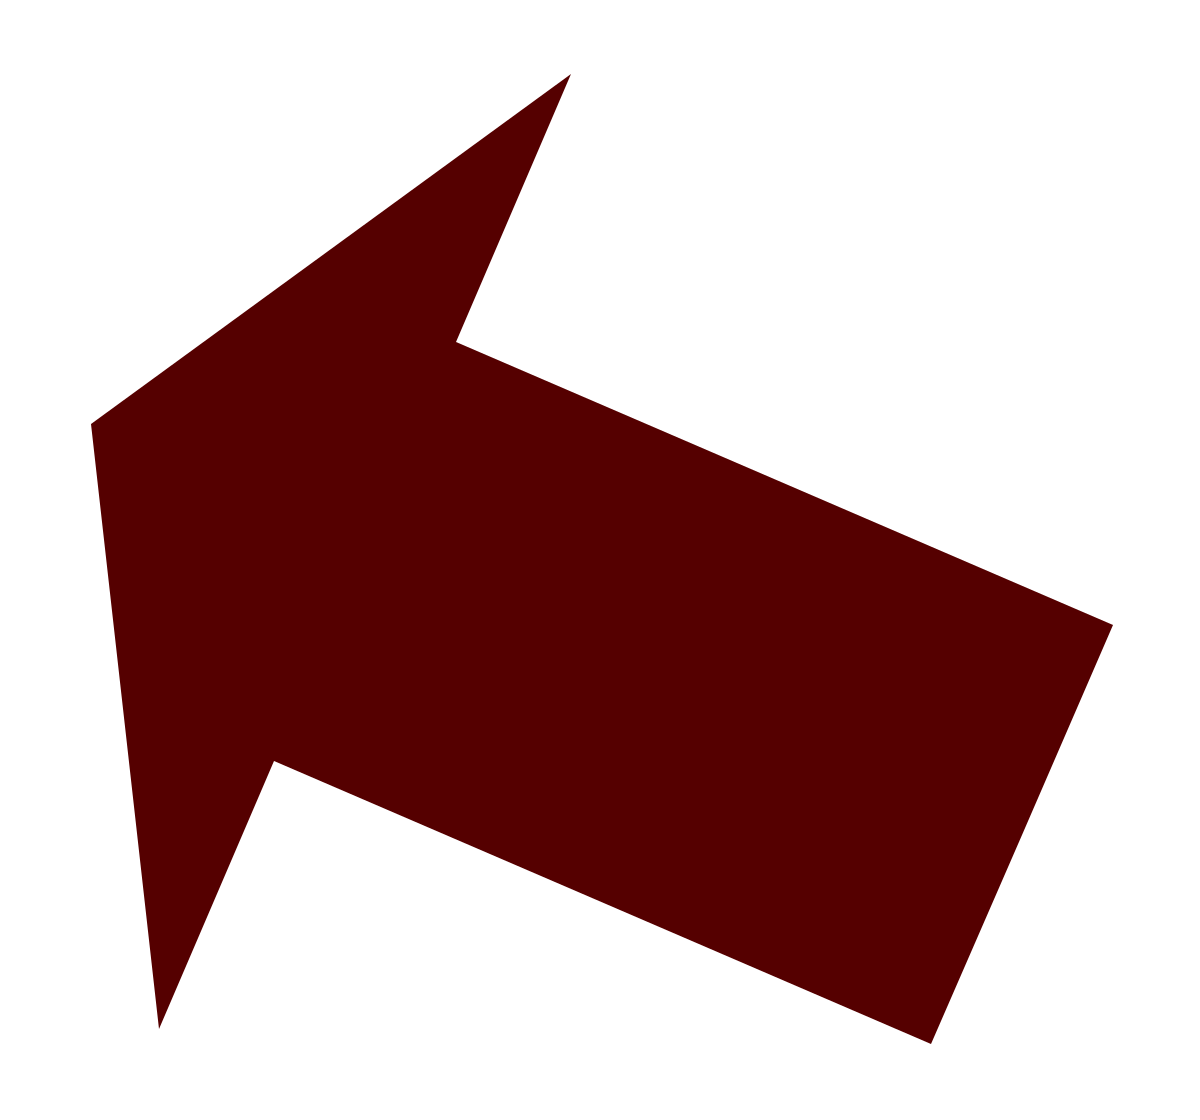 Download File:Brown Arrow.svg - Wikimedia Commons